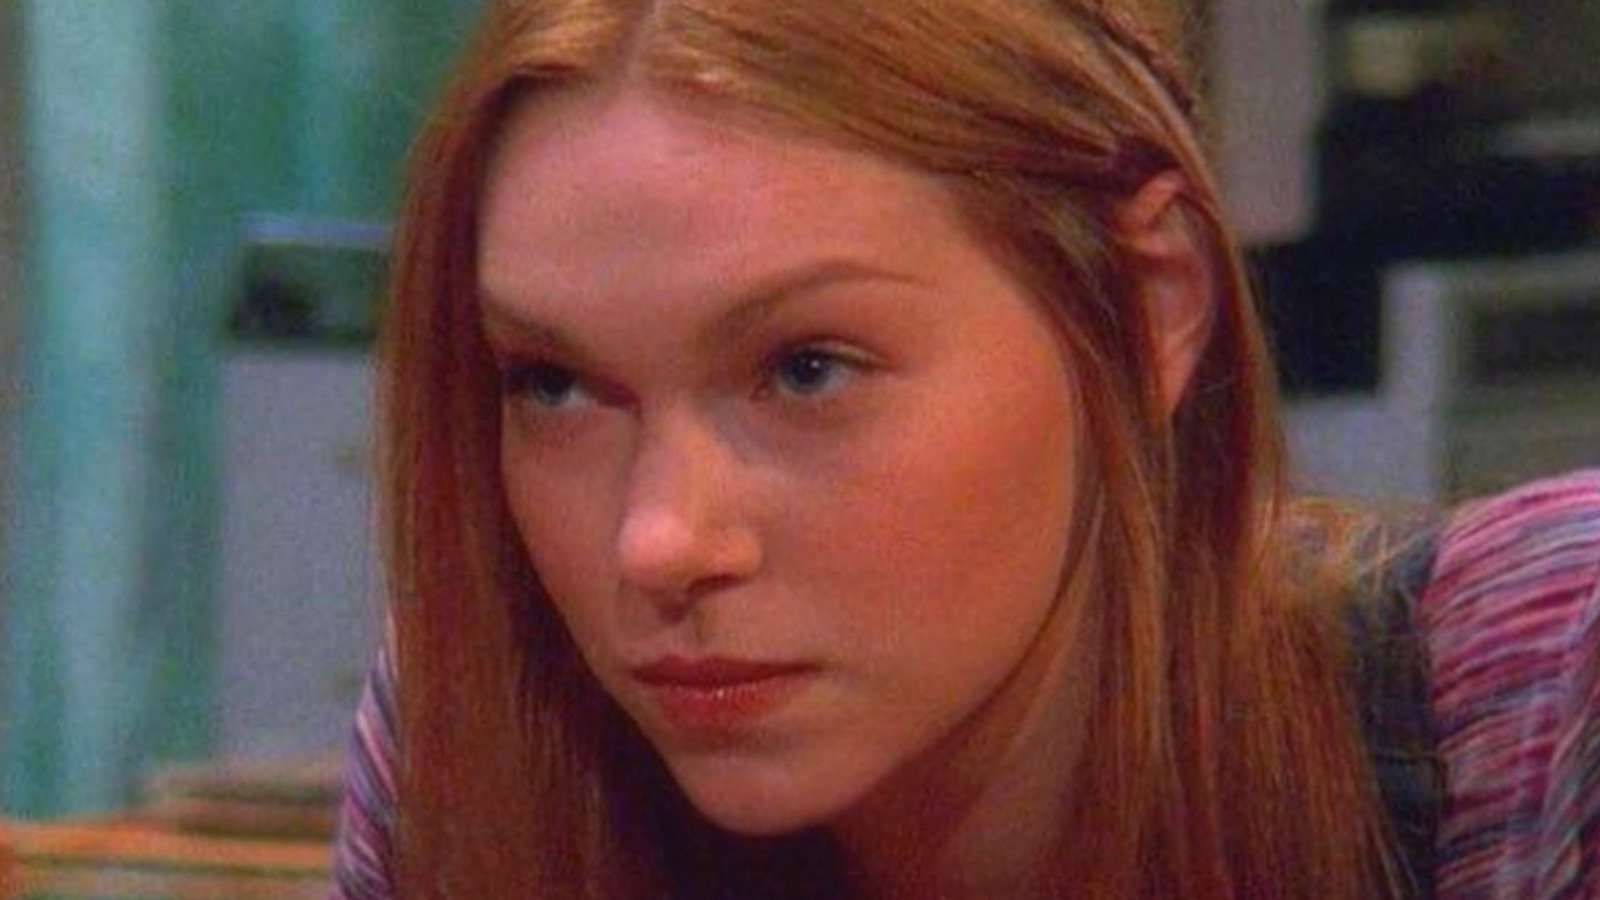 The One That '70s Show Storyline That Disappeared Without Explanation